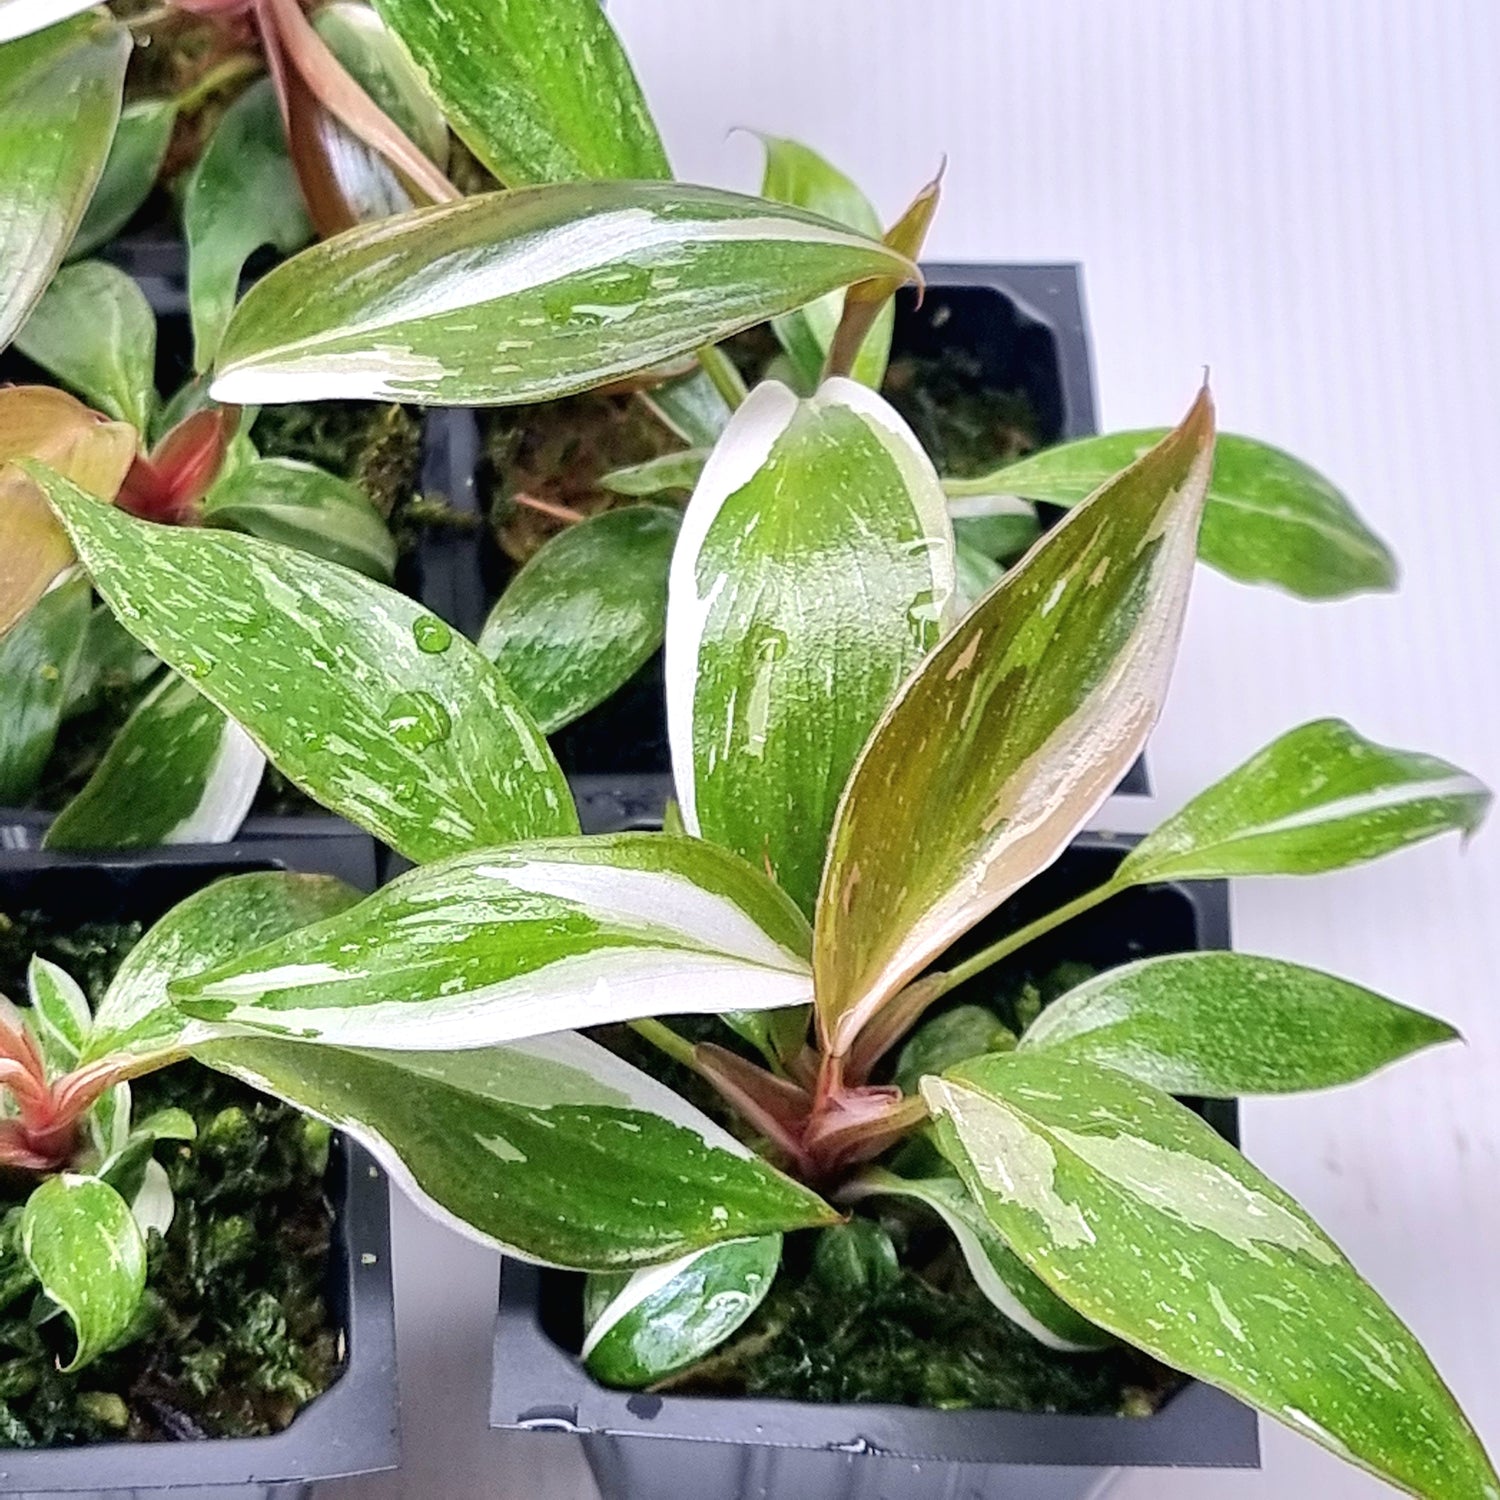 rare Philodendron Red Anderson variegated for sale in Perth Australia